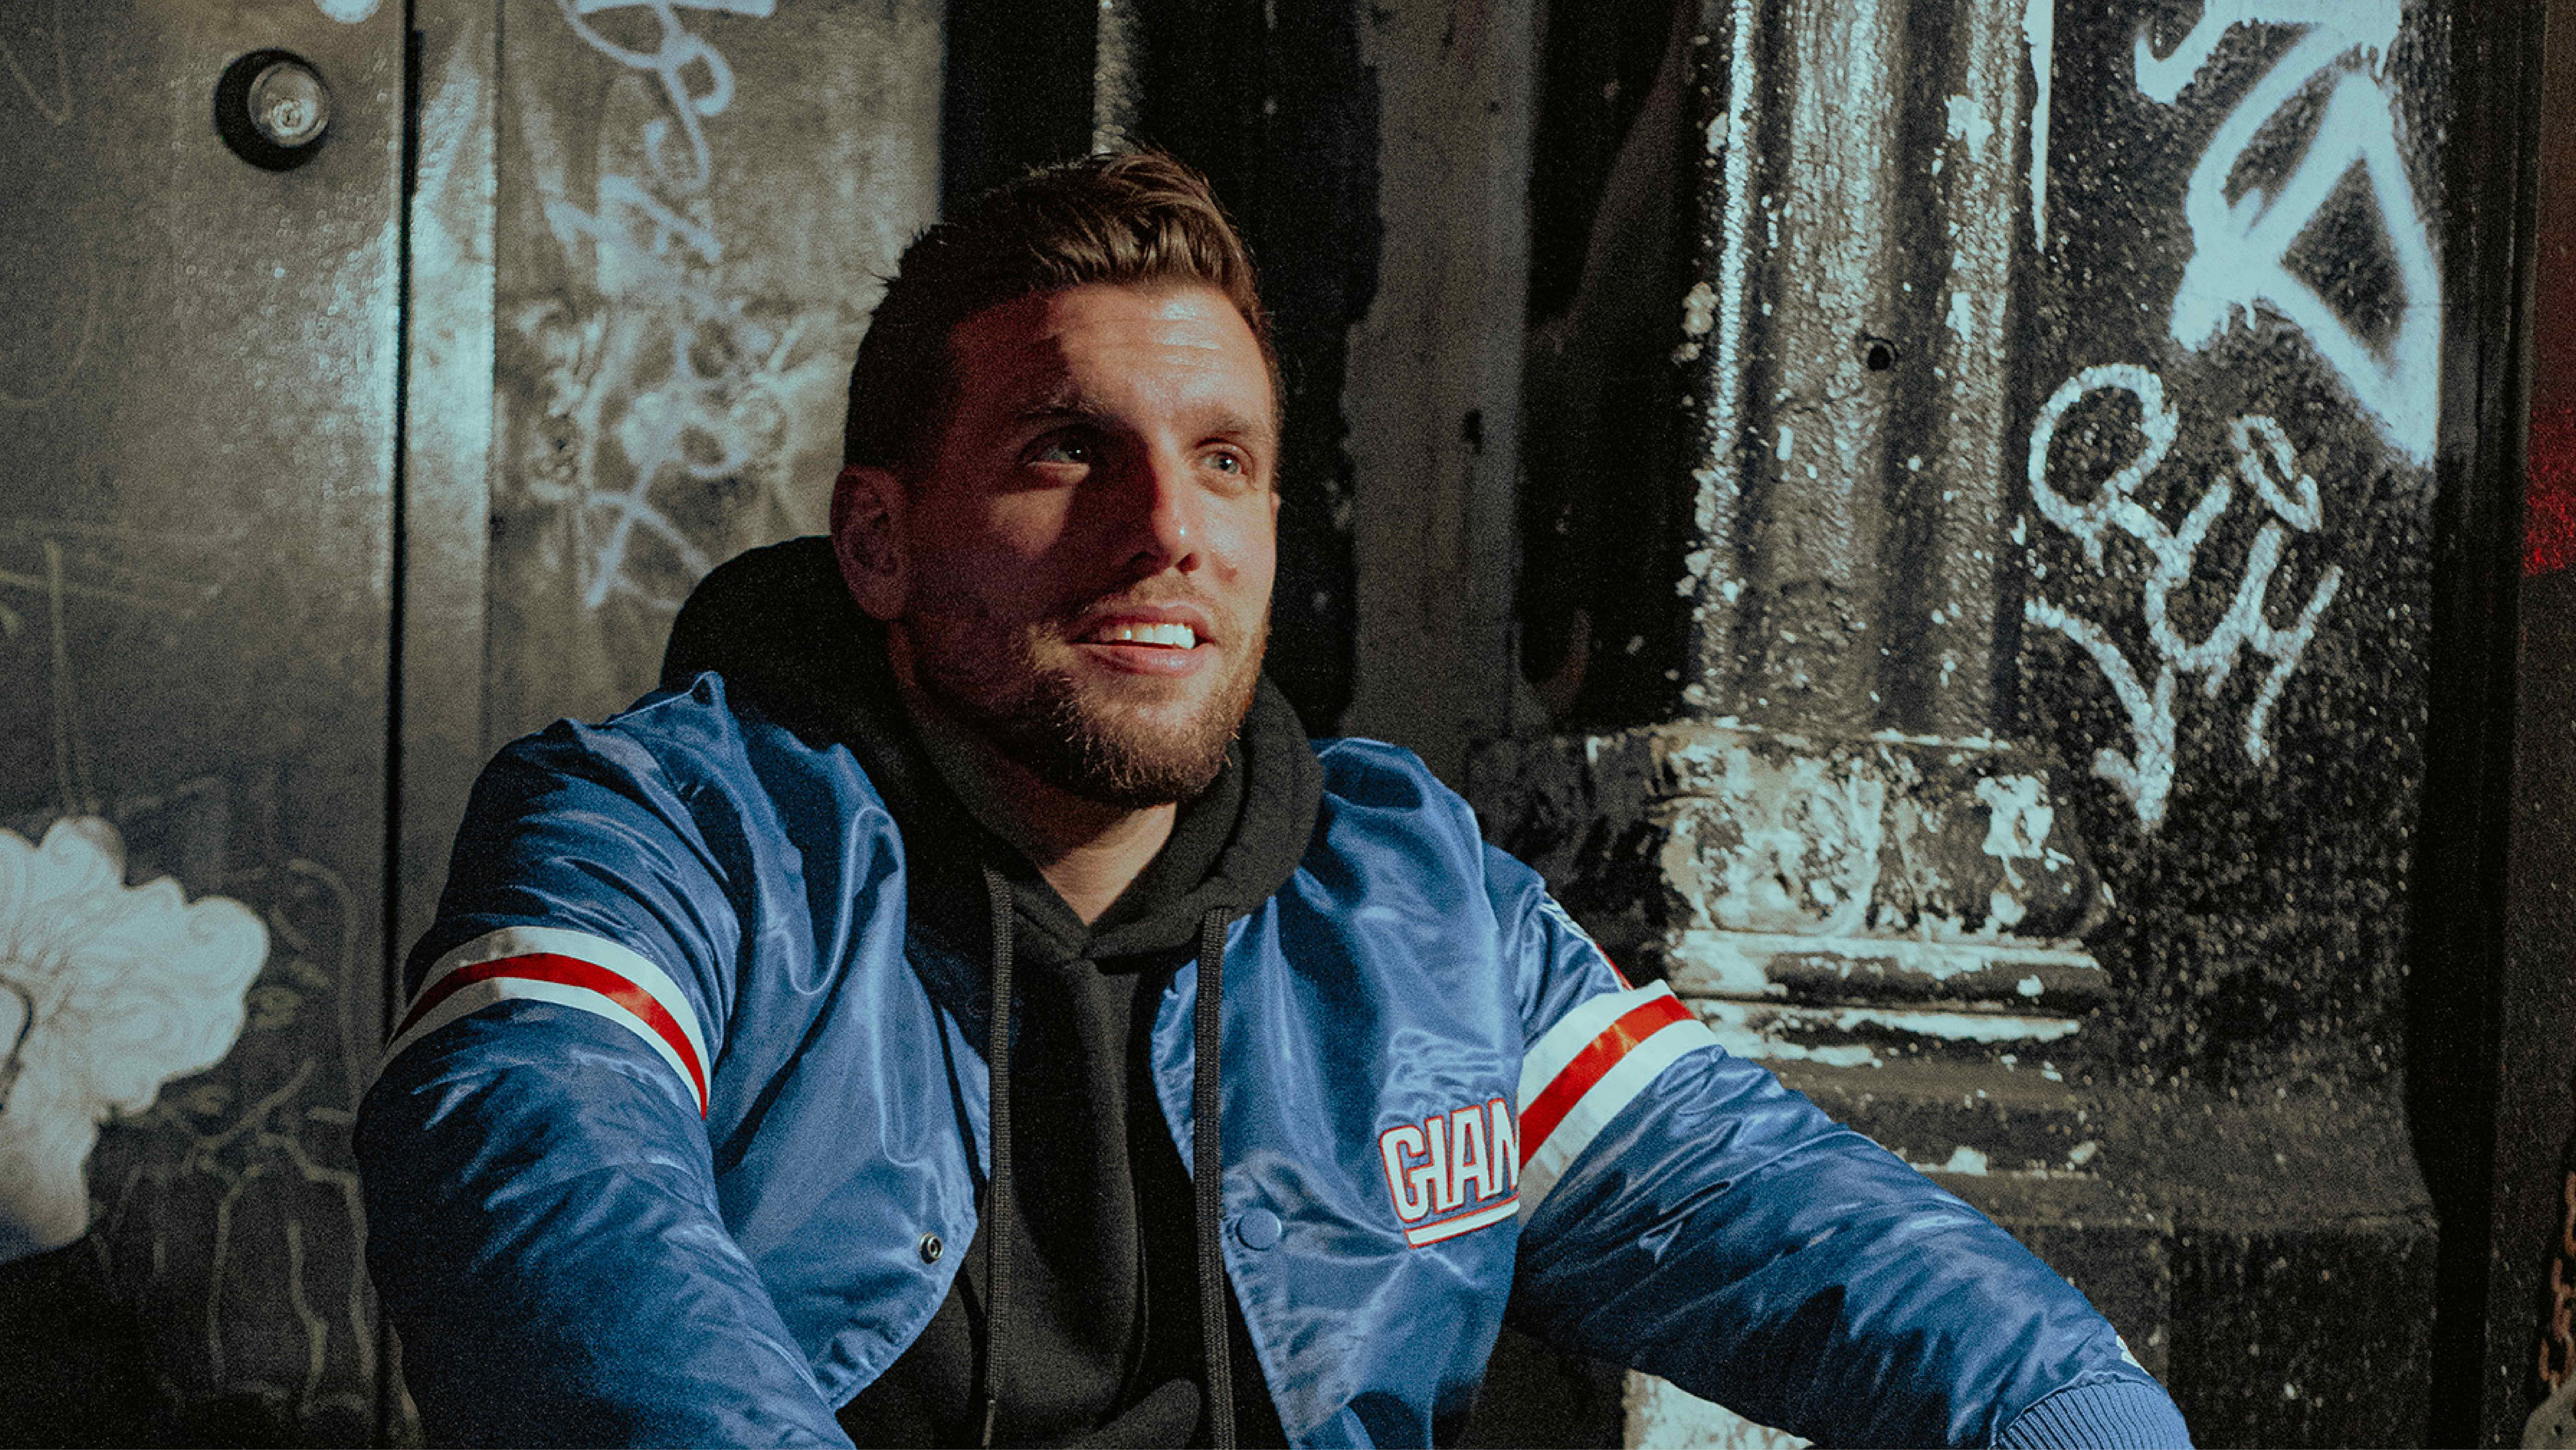 Chris Distefano free pre-sale code for show tickets in New York, NY (The Theater at MSG)